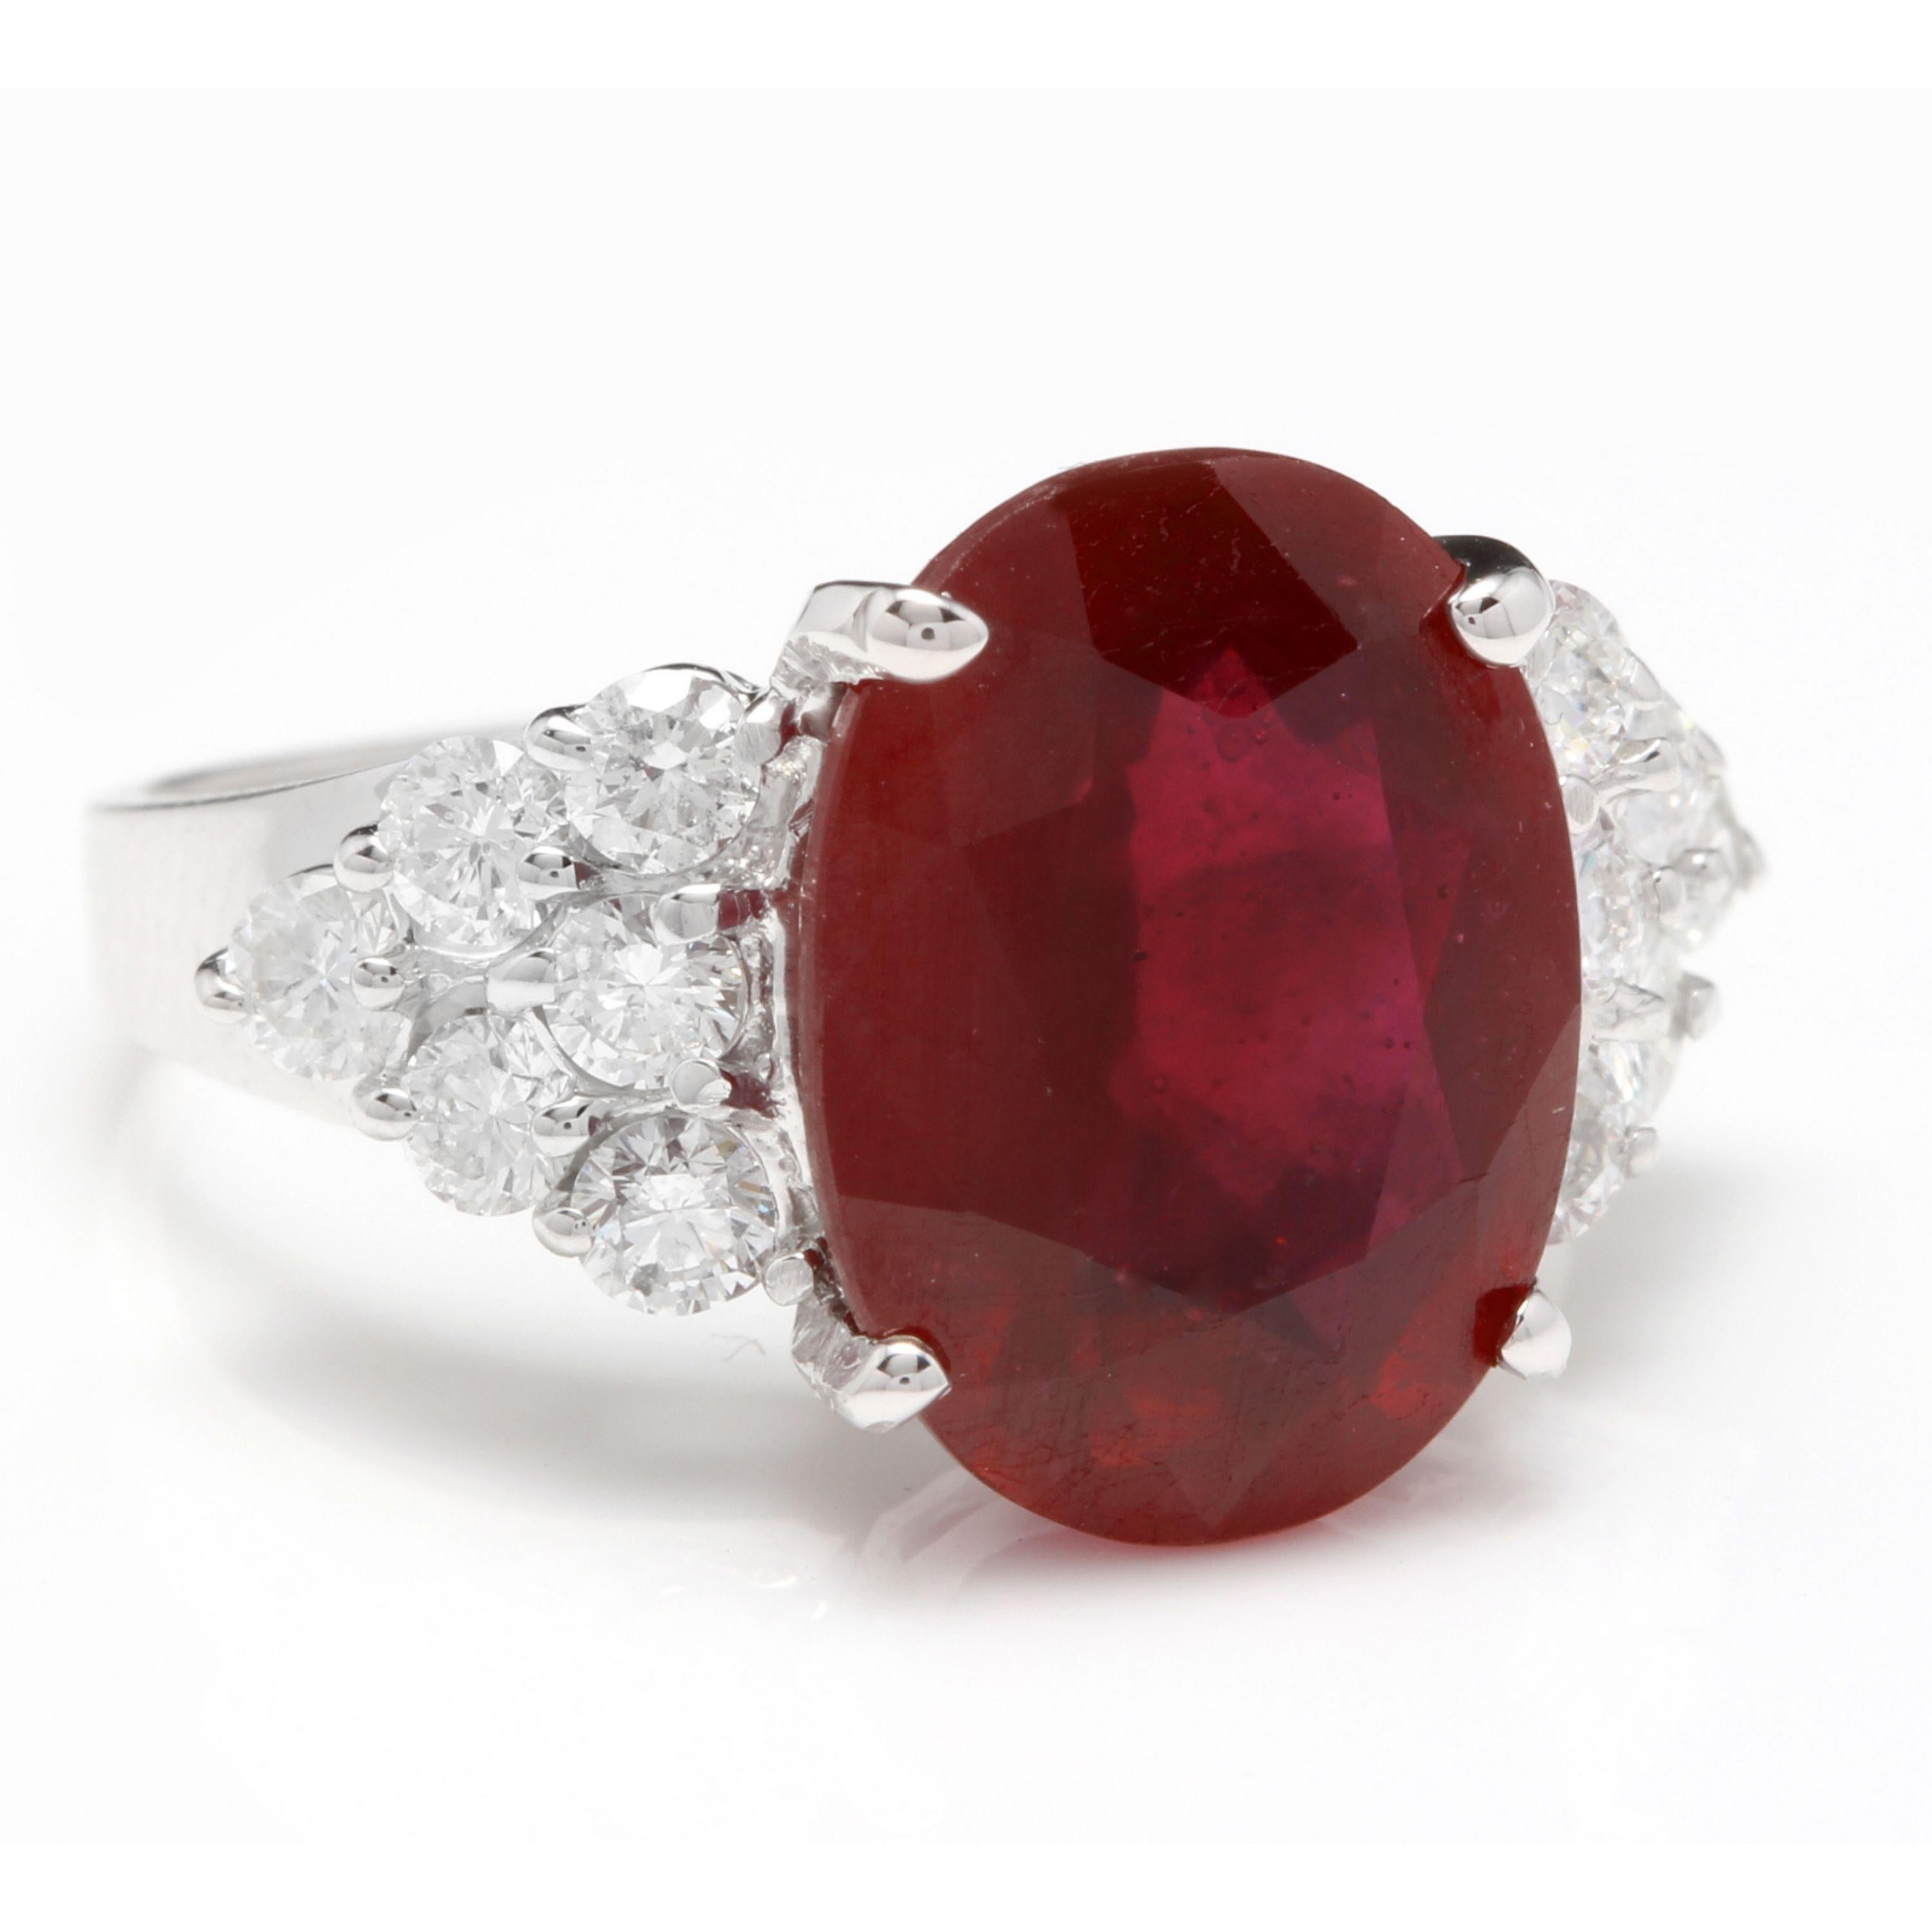 9.40 Carats Impressive Red Ruby and Natural Diamond 14K White Gold Ring

Total Red Ruby Weight is: Approx. 8.50 Carats

Ruby Treatment: Lead Glass Filling

Ruby Measures: Approx. Approx. 13.65 x 10.00mm

Natural Round Diamonds Weight: Approx. 0.90